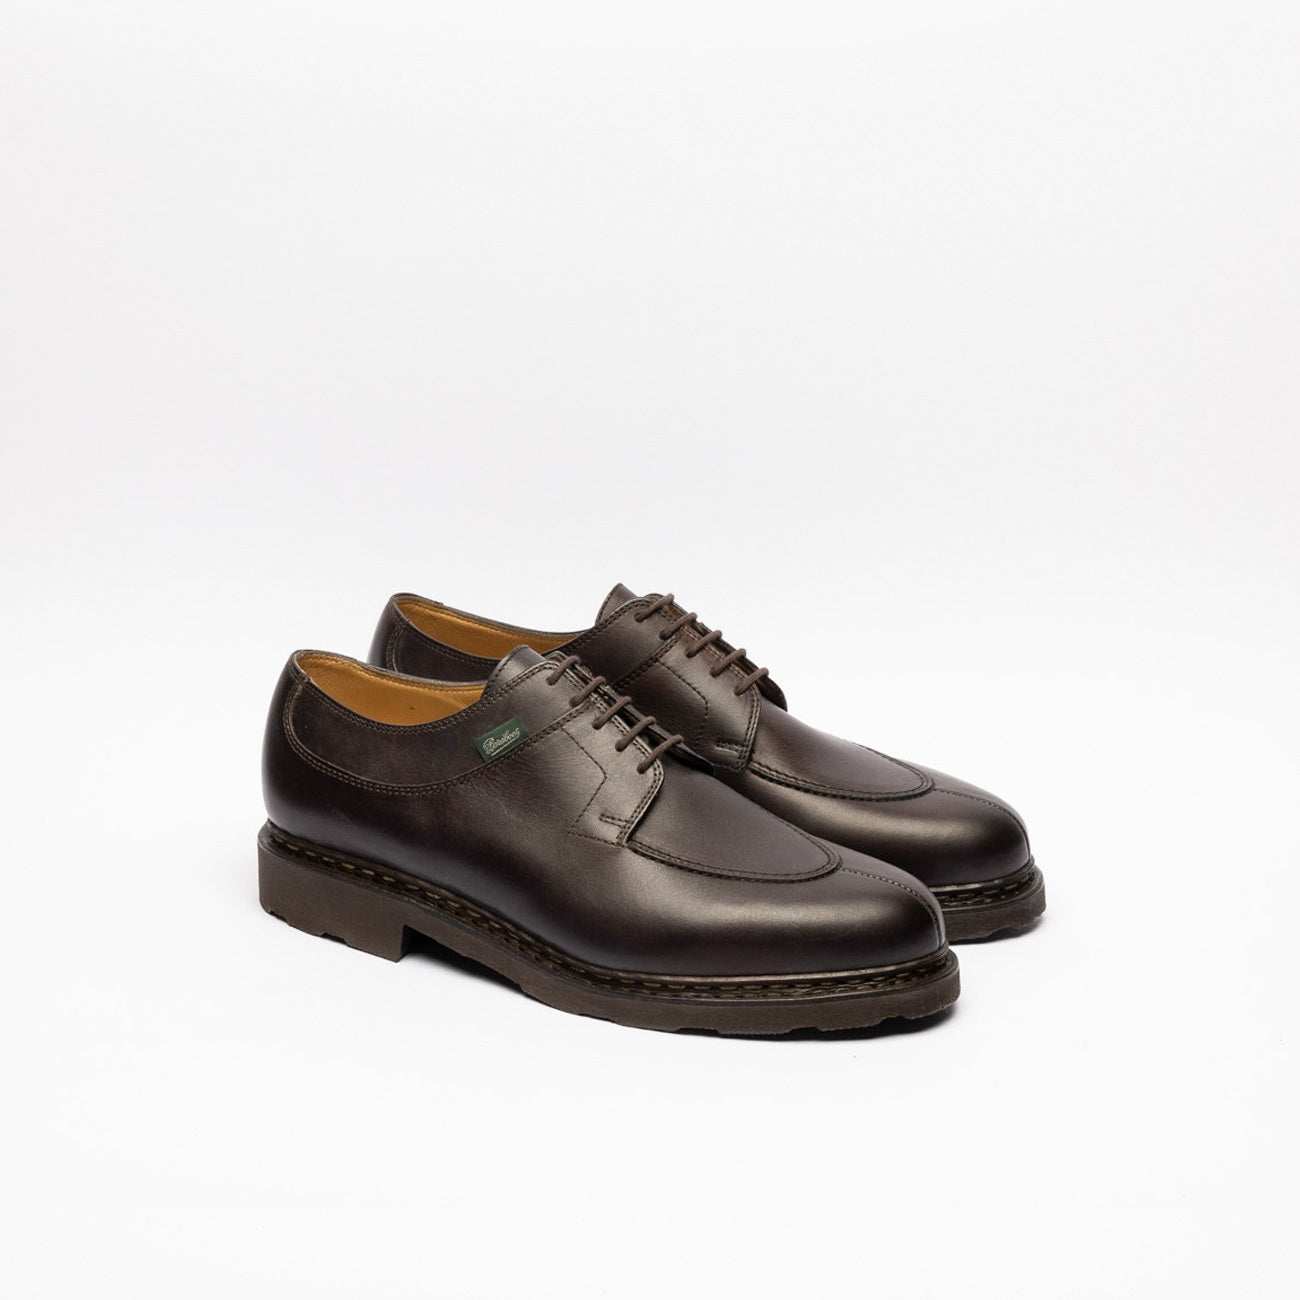 Paraboot Avignon Griff II derby lace-up in brown leather – Borghini